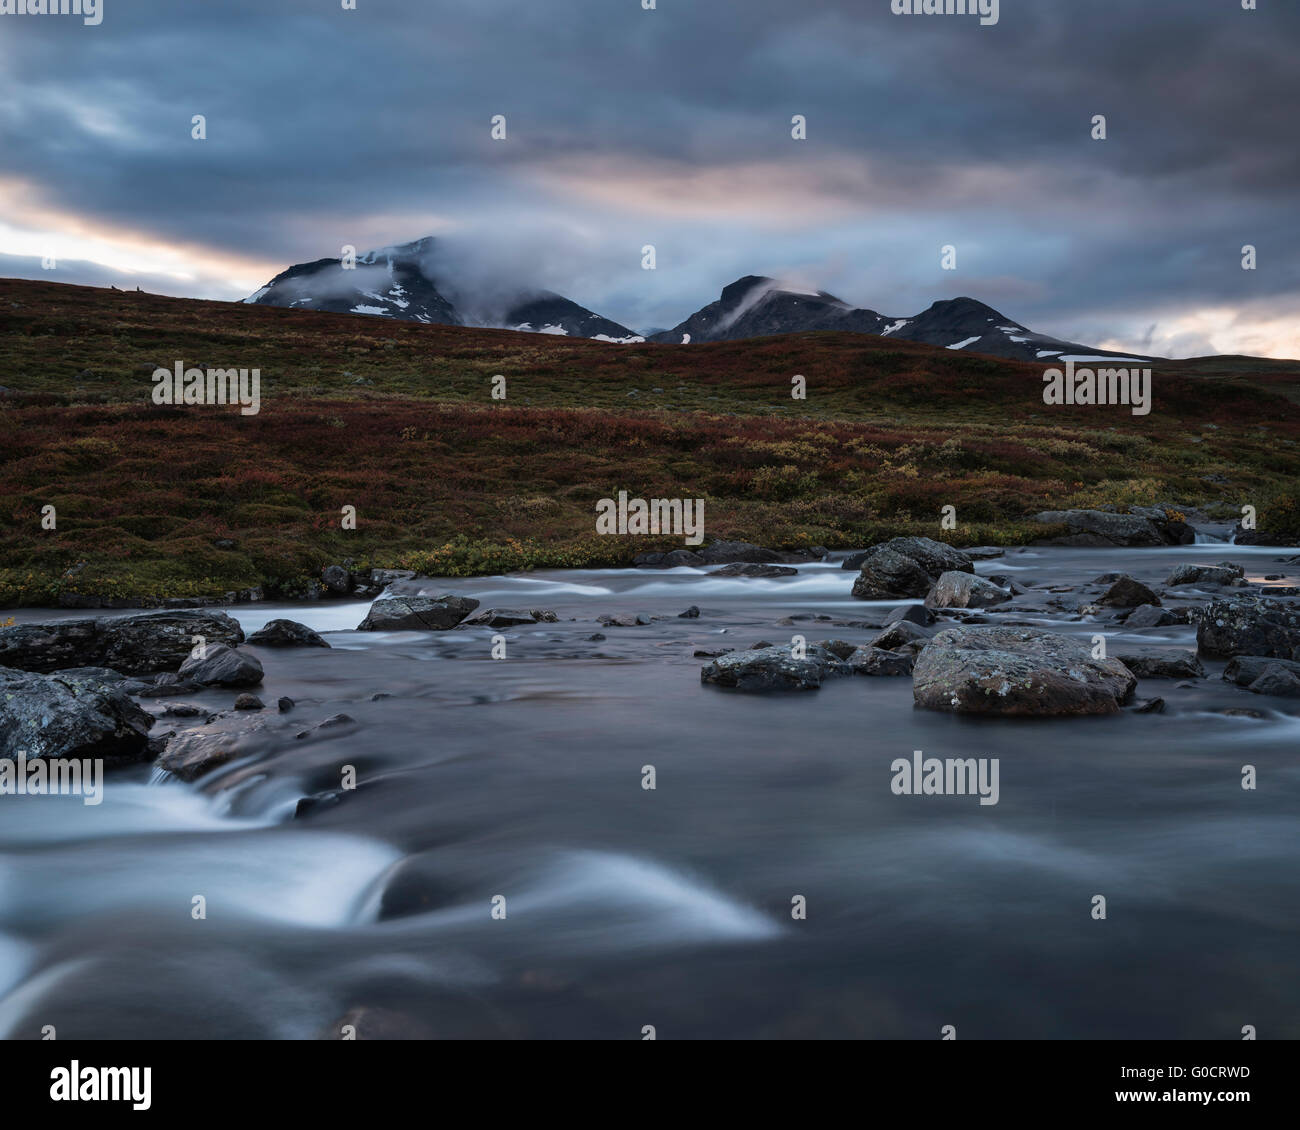 Flowing river outside of Syter hut with mountains of Norra Stofjället in background, Kungsleden trail, Lapland, Sweden Stock Photo